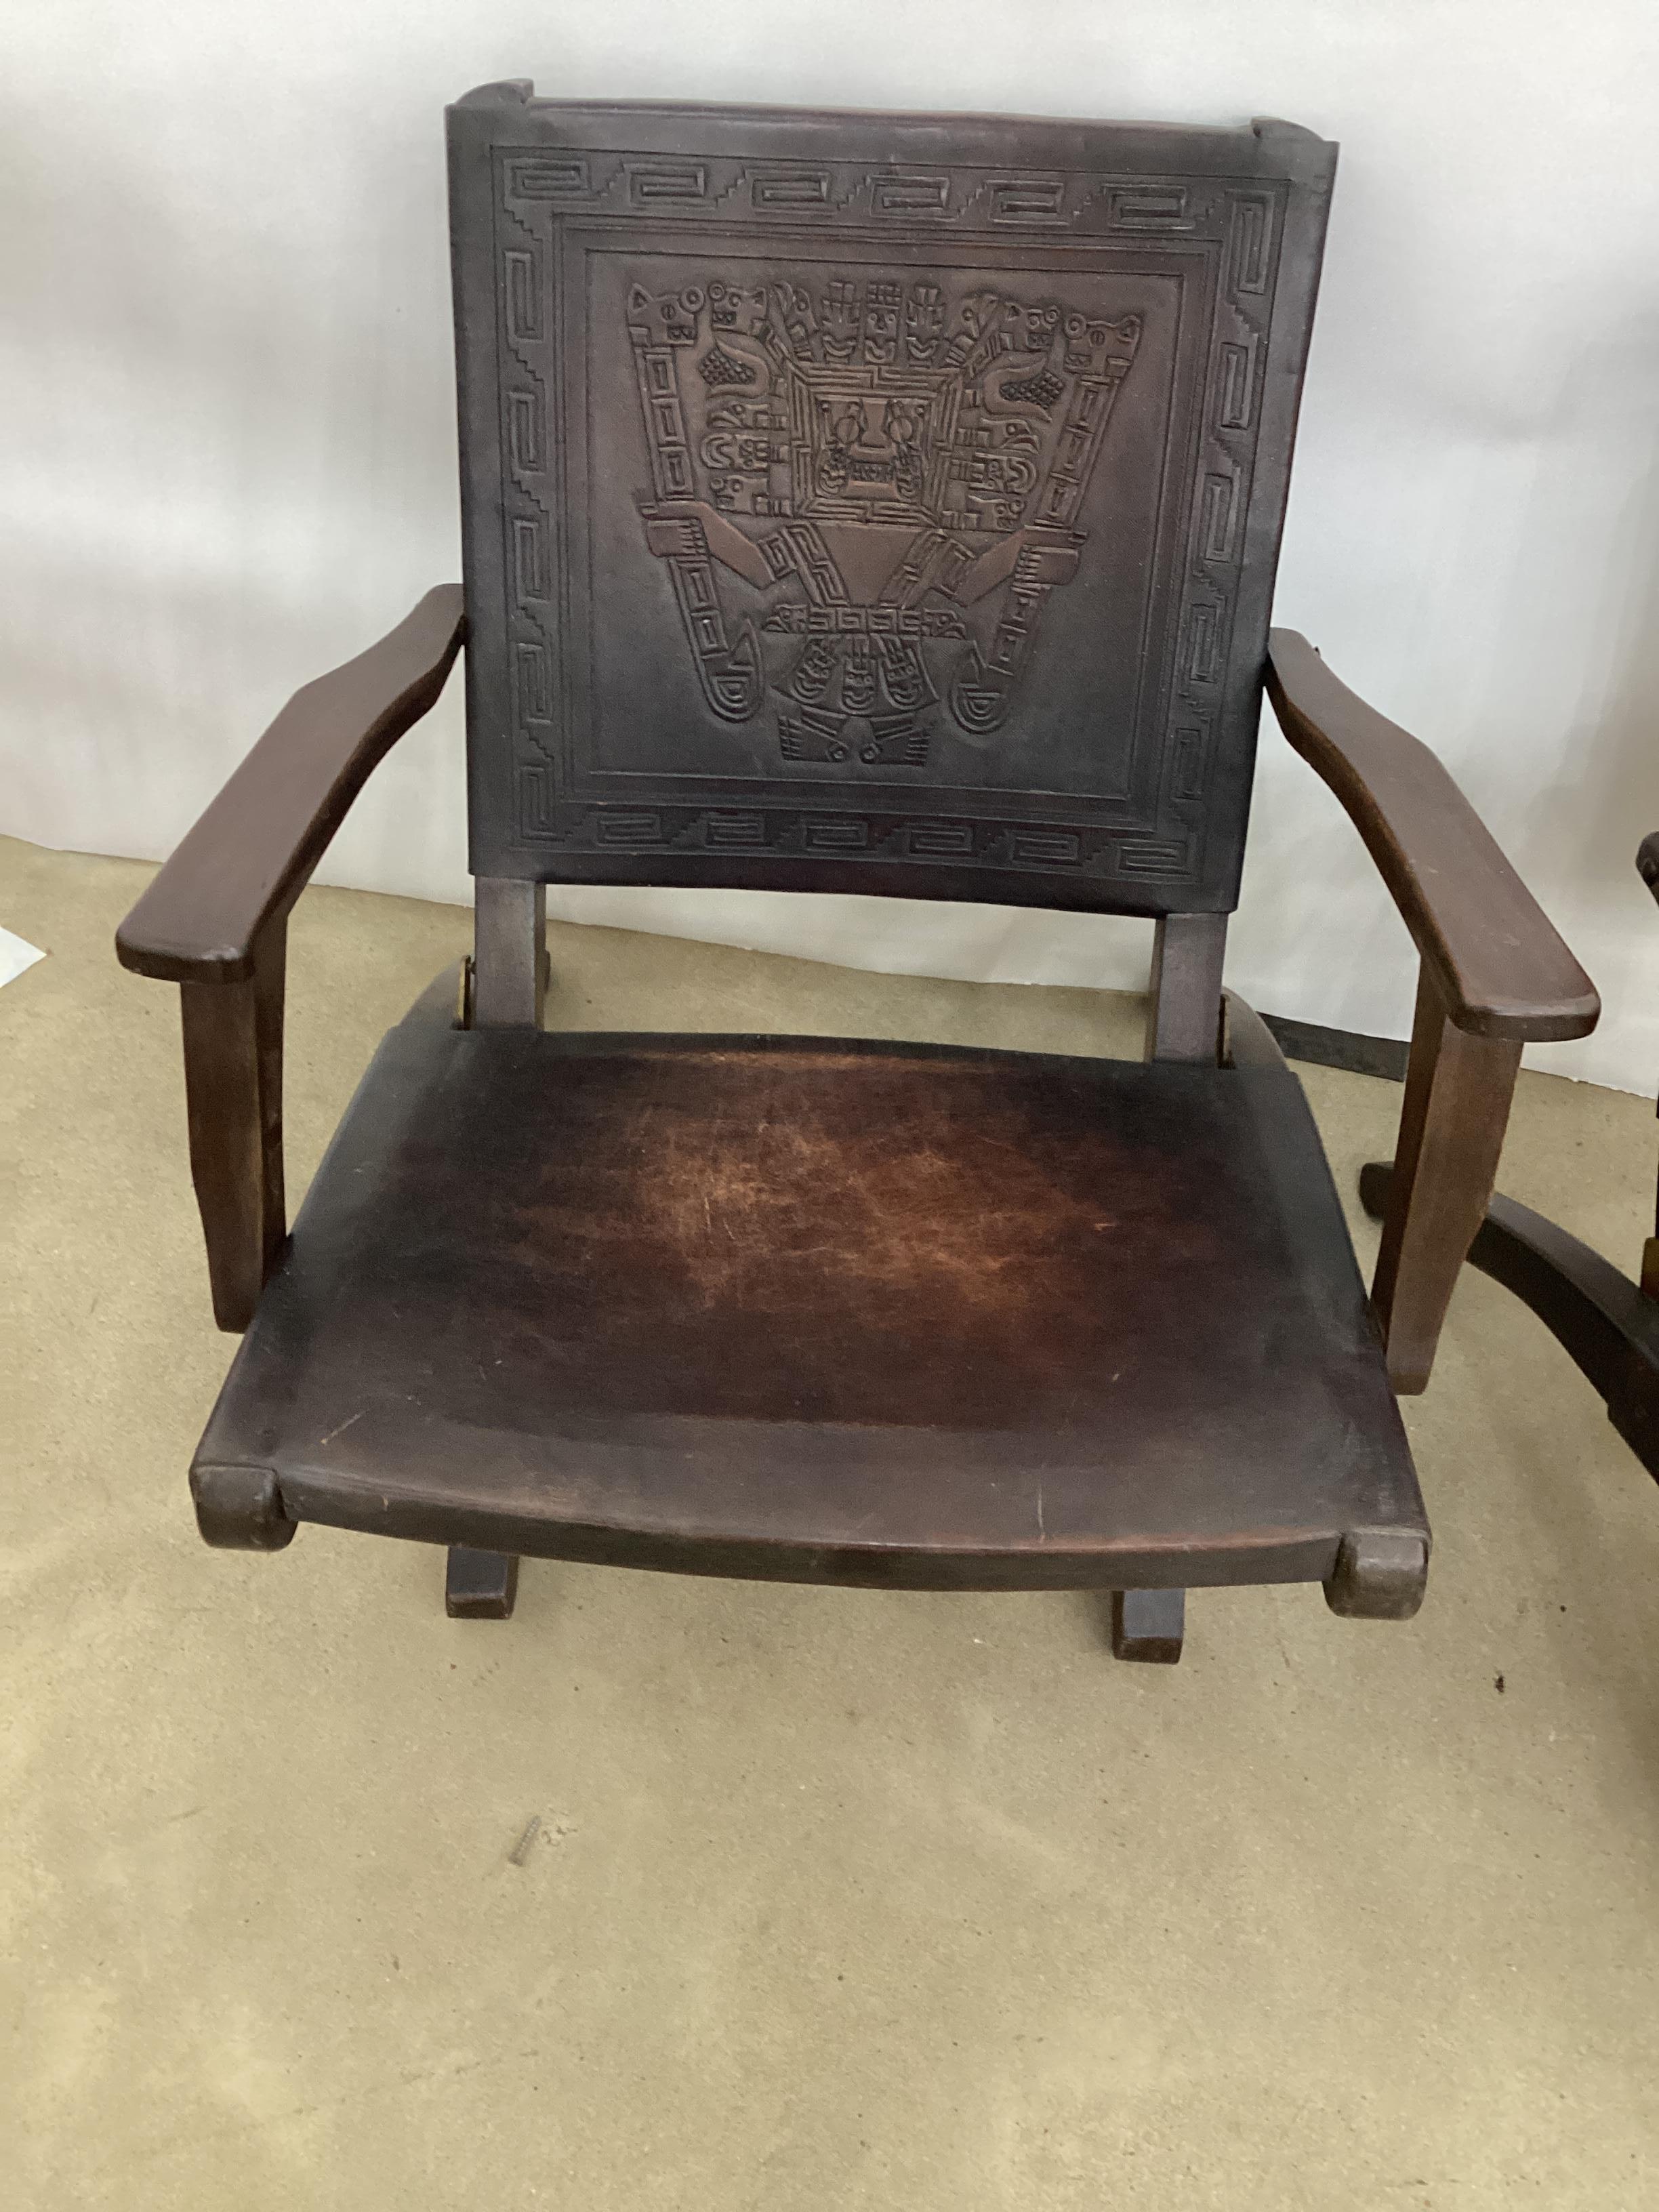 Beautiful pair of folding chair in solid meranti, backrest and seat in brown saddle leather embossed with inca patterns. This modernist chair was designed by Angel Pazmino for Meubles de Estilo in the late 1960s. Ecuador at this time received US aid